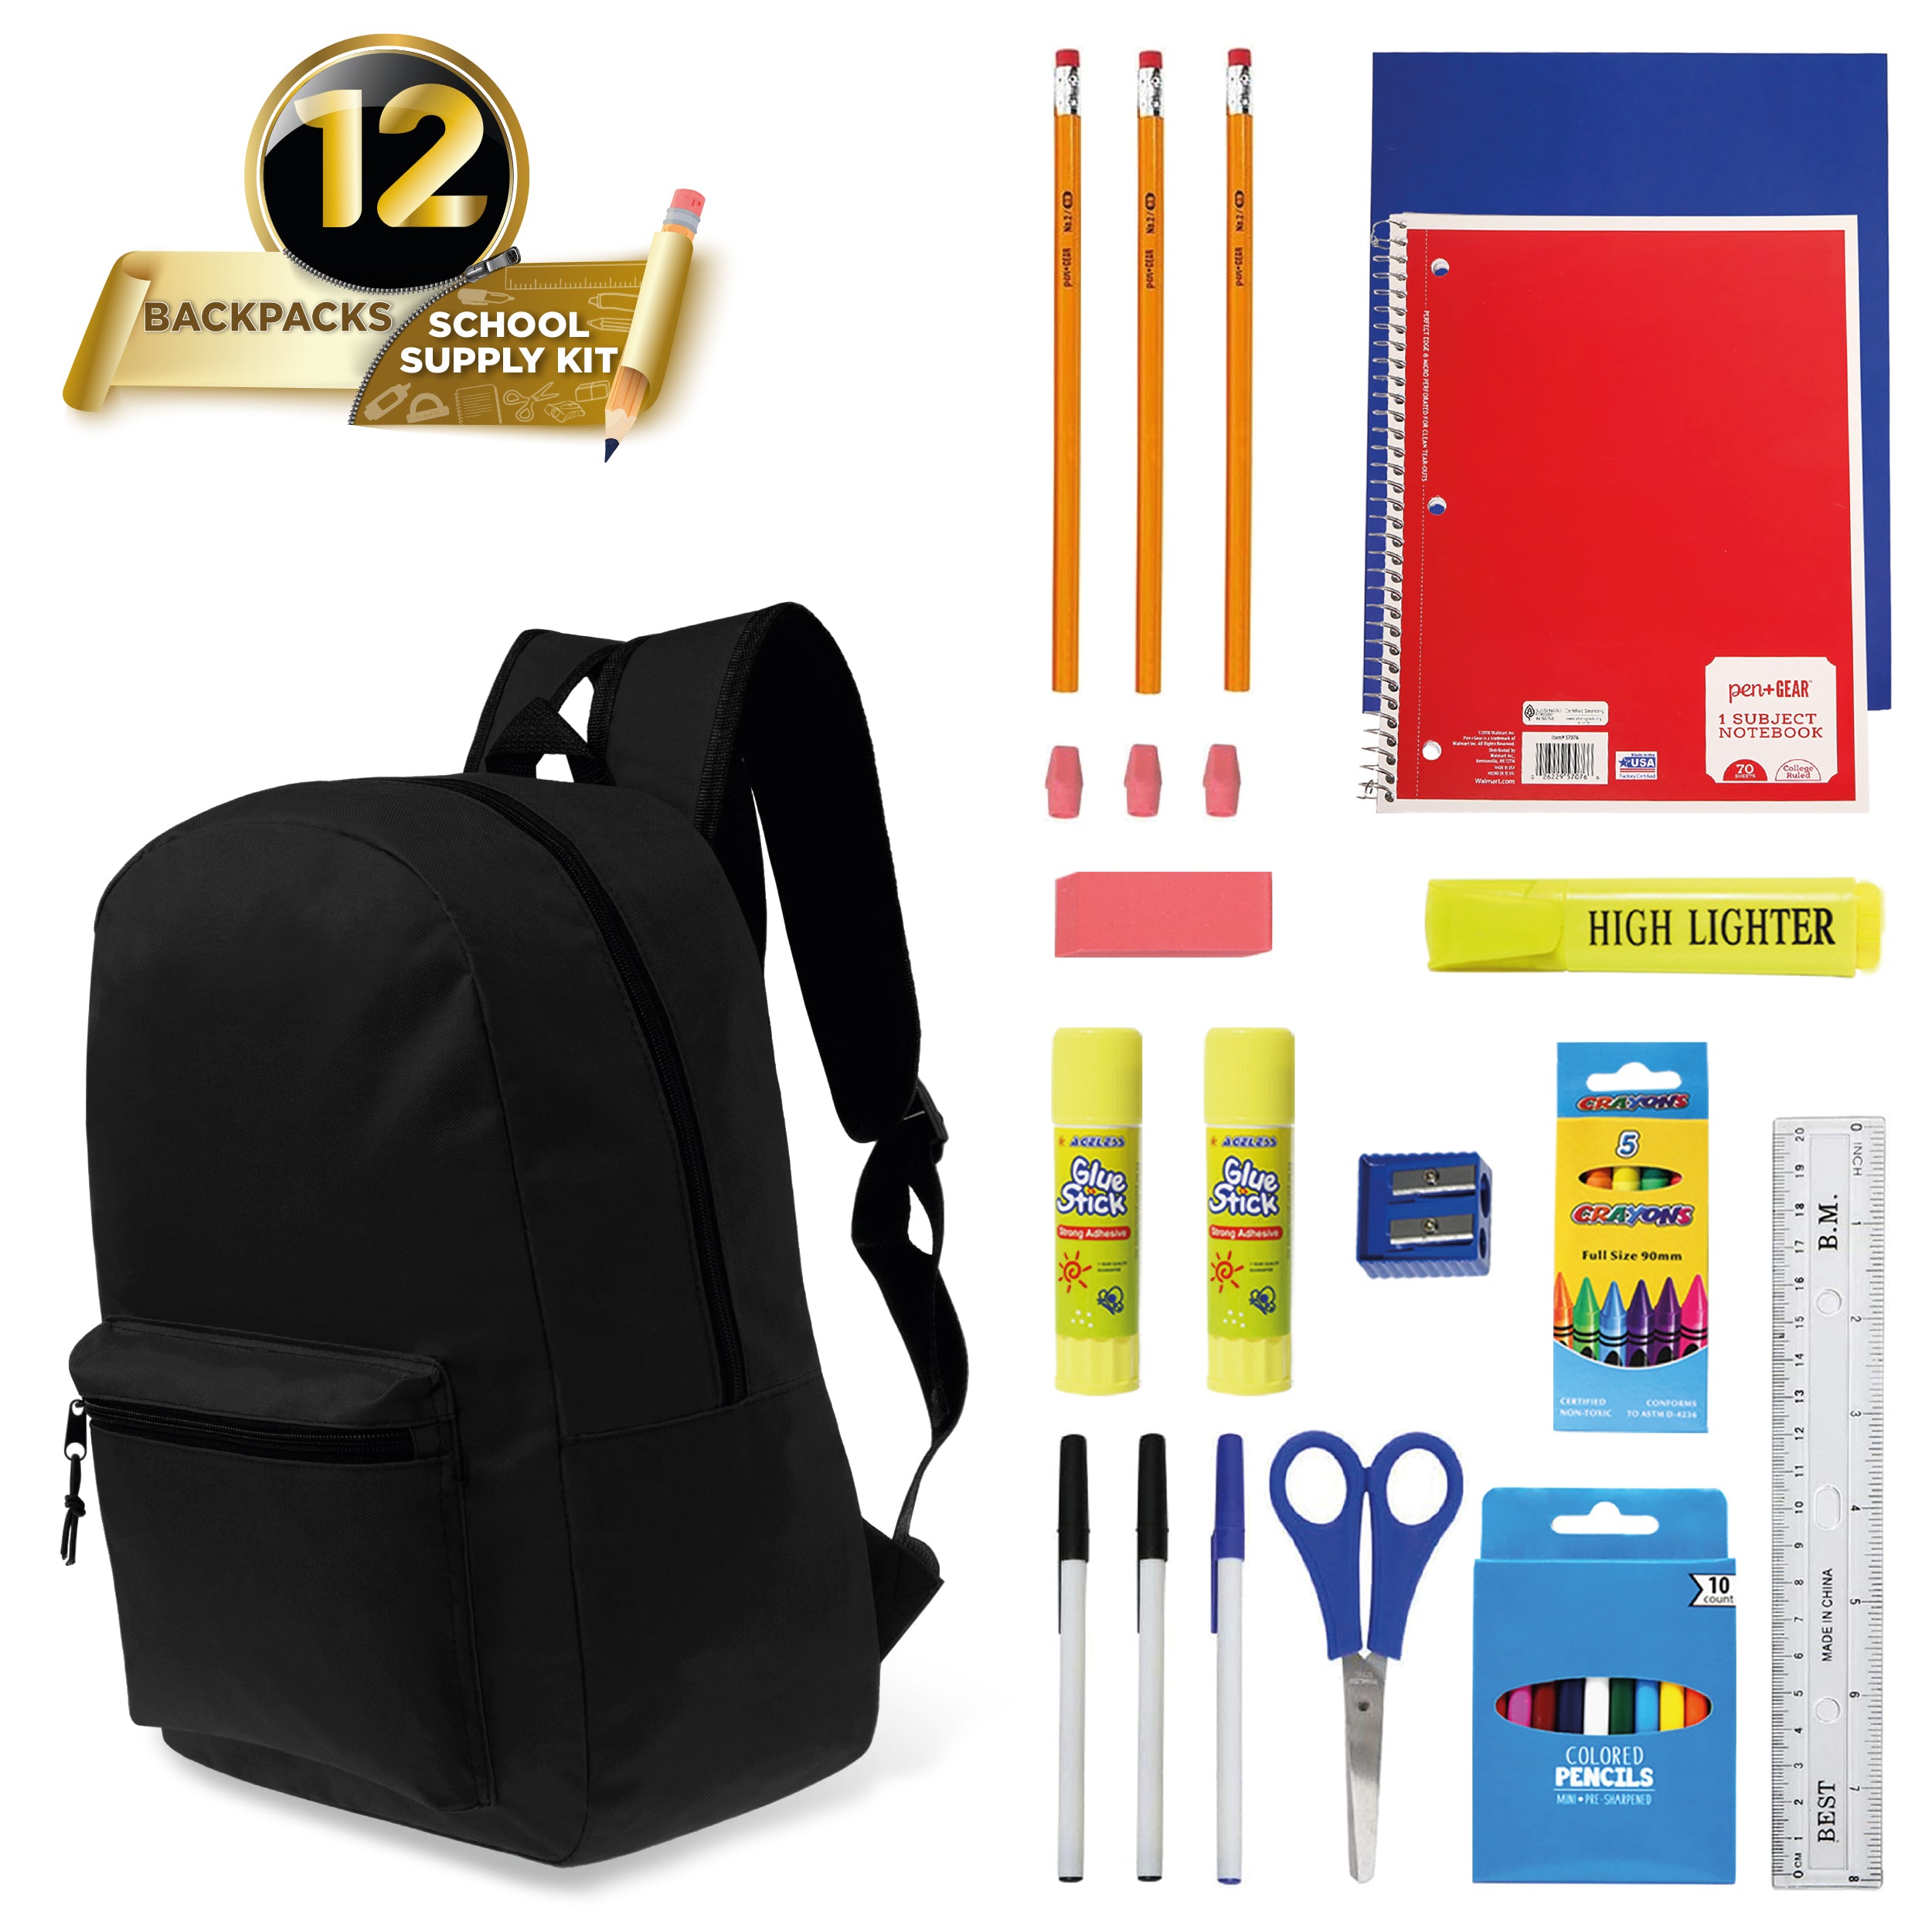 17 inches School Backpacks for Kids In Black Color Bulk School Supplies - Kit Case Of 12